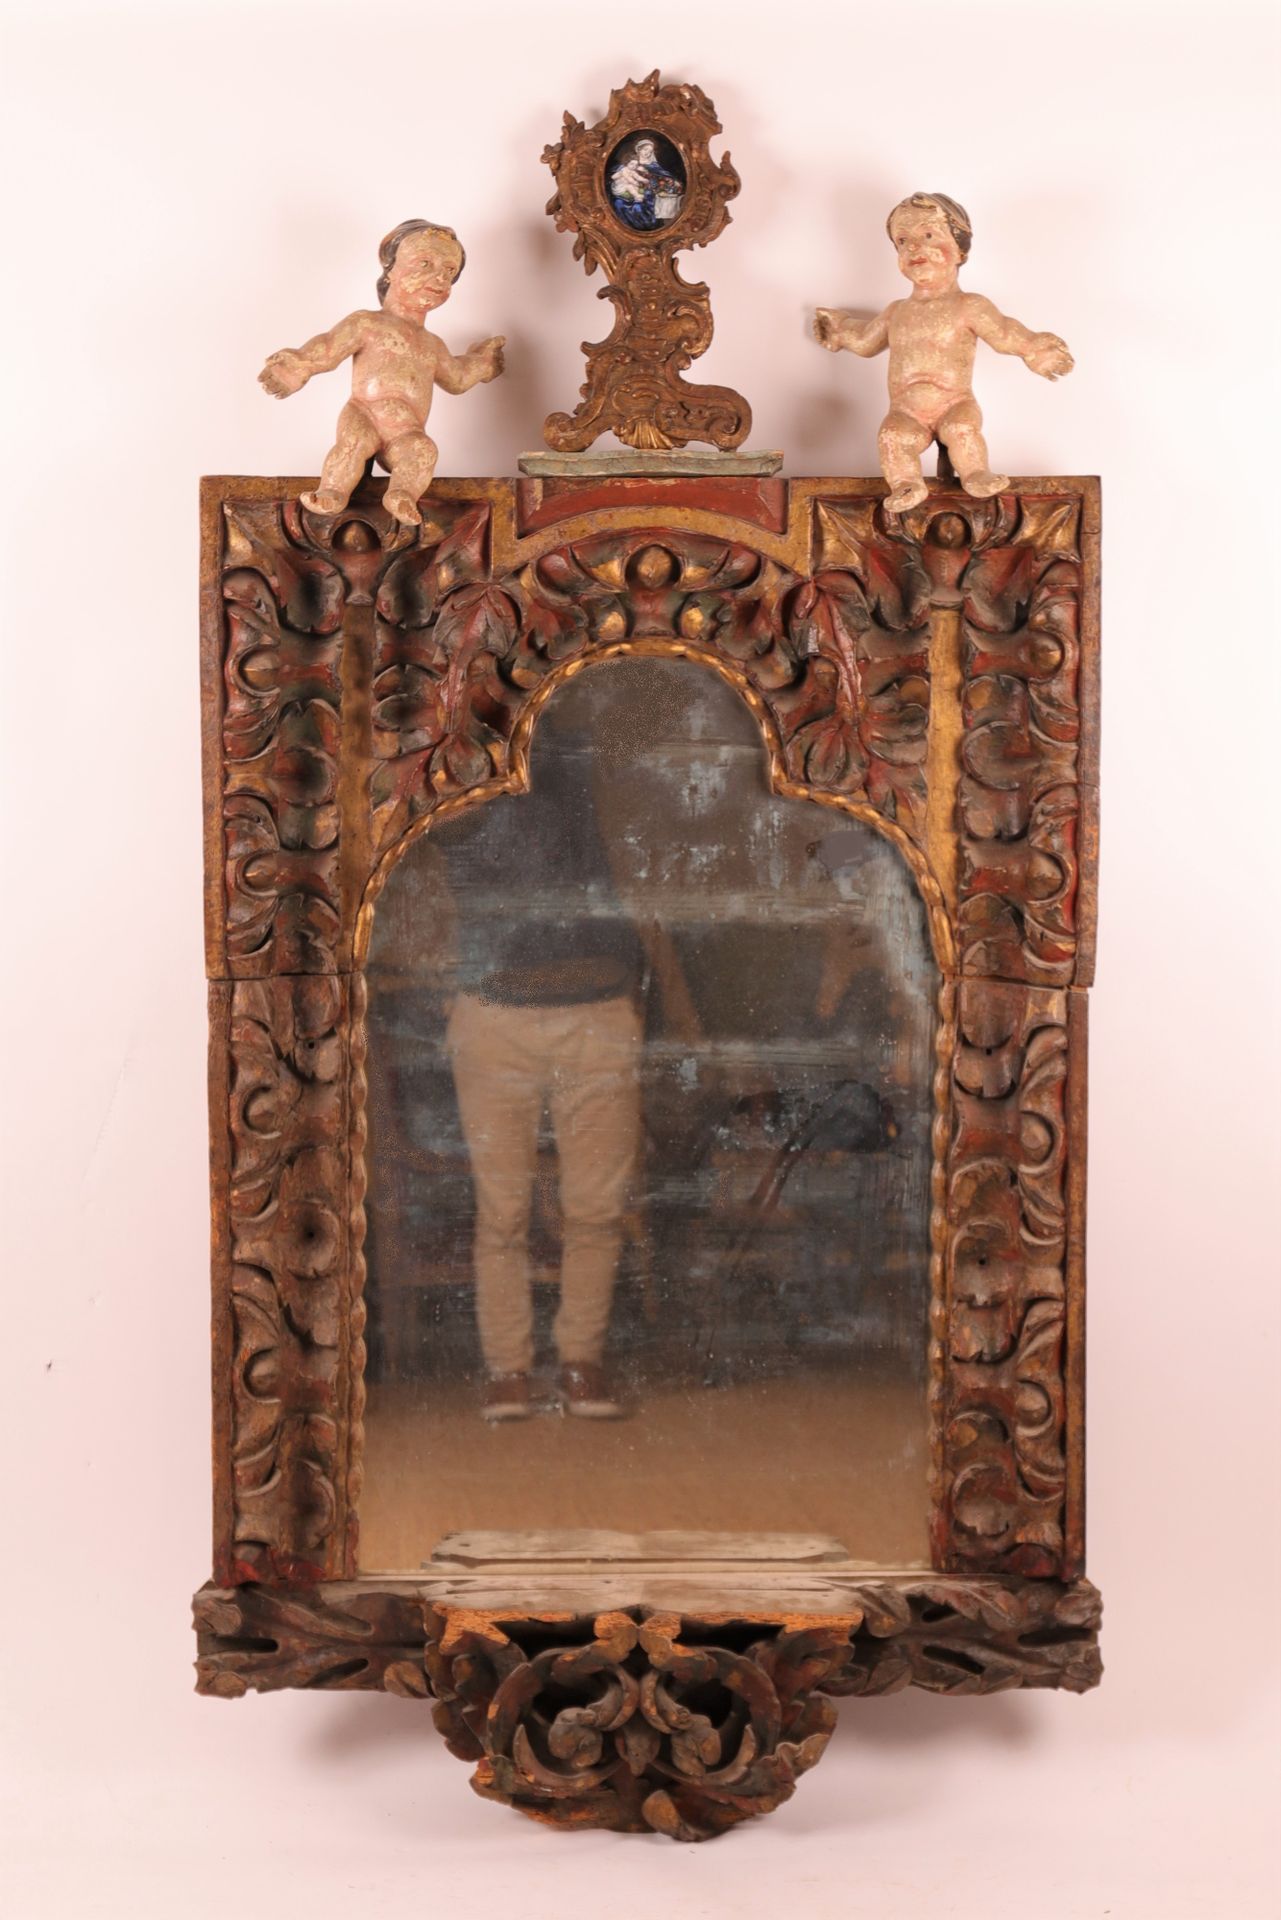 Null LARGE ITALIAN CARVED WOOD MIRROR, 18th century
Carved wood polychrome enhan&hellip;